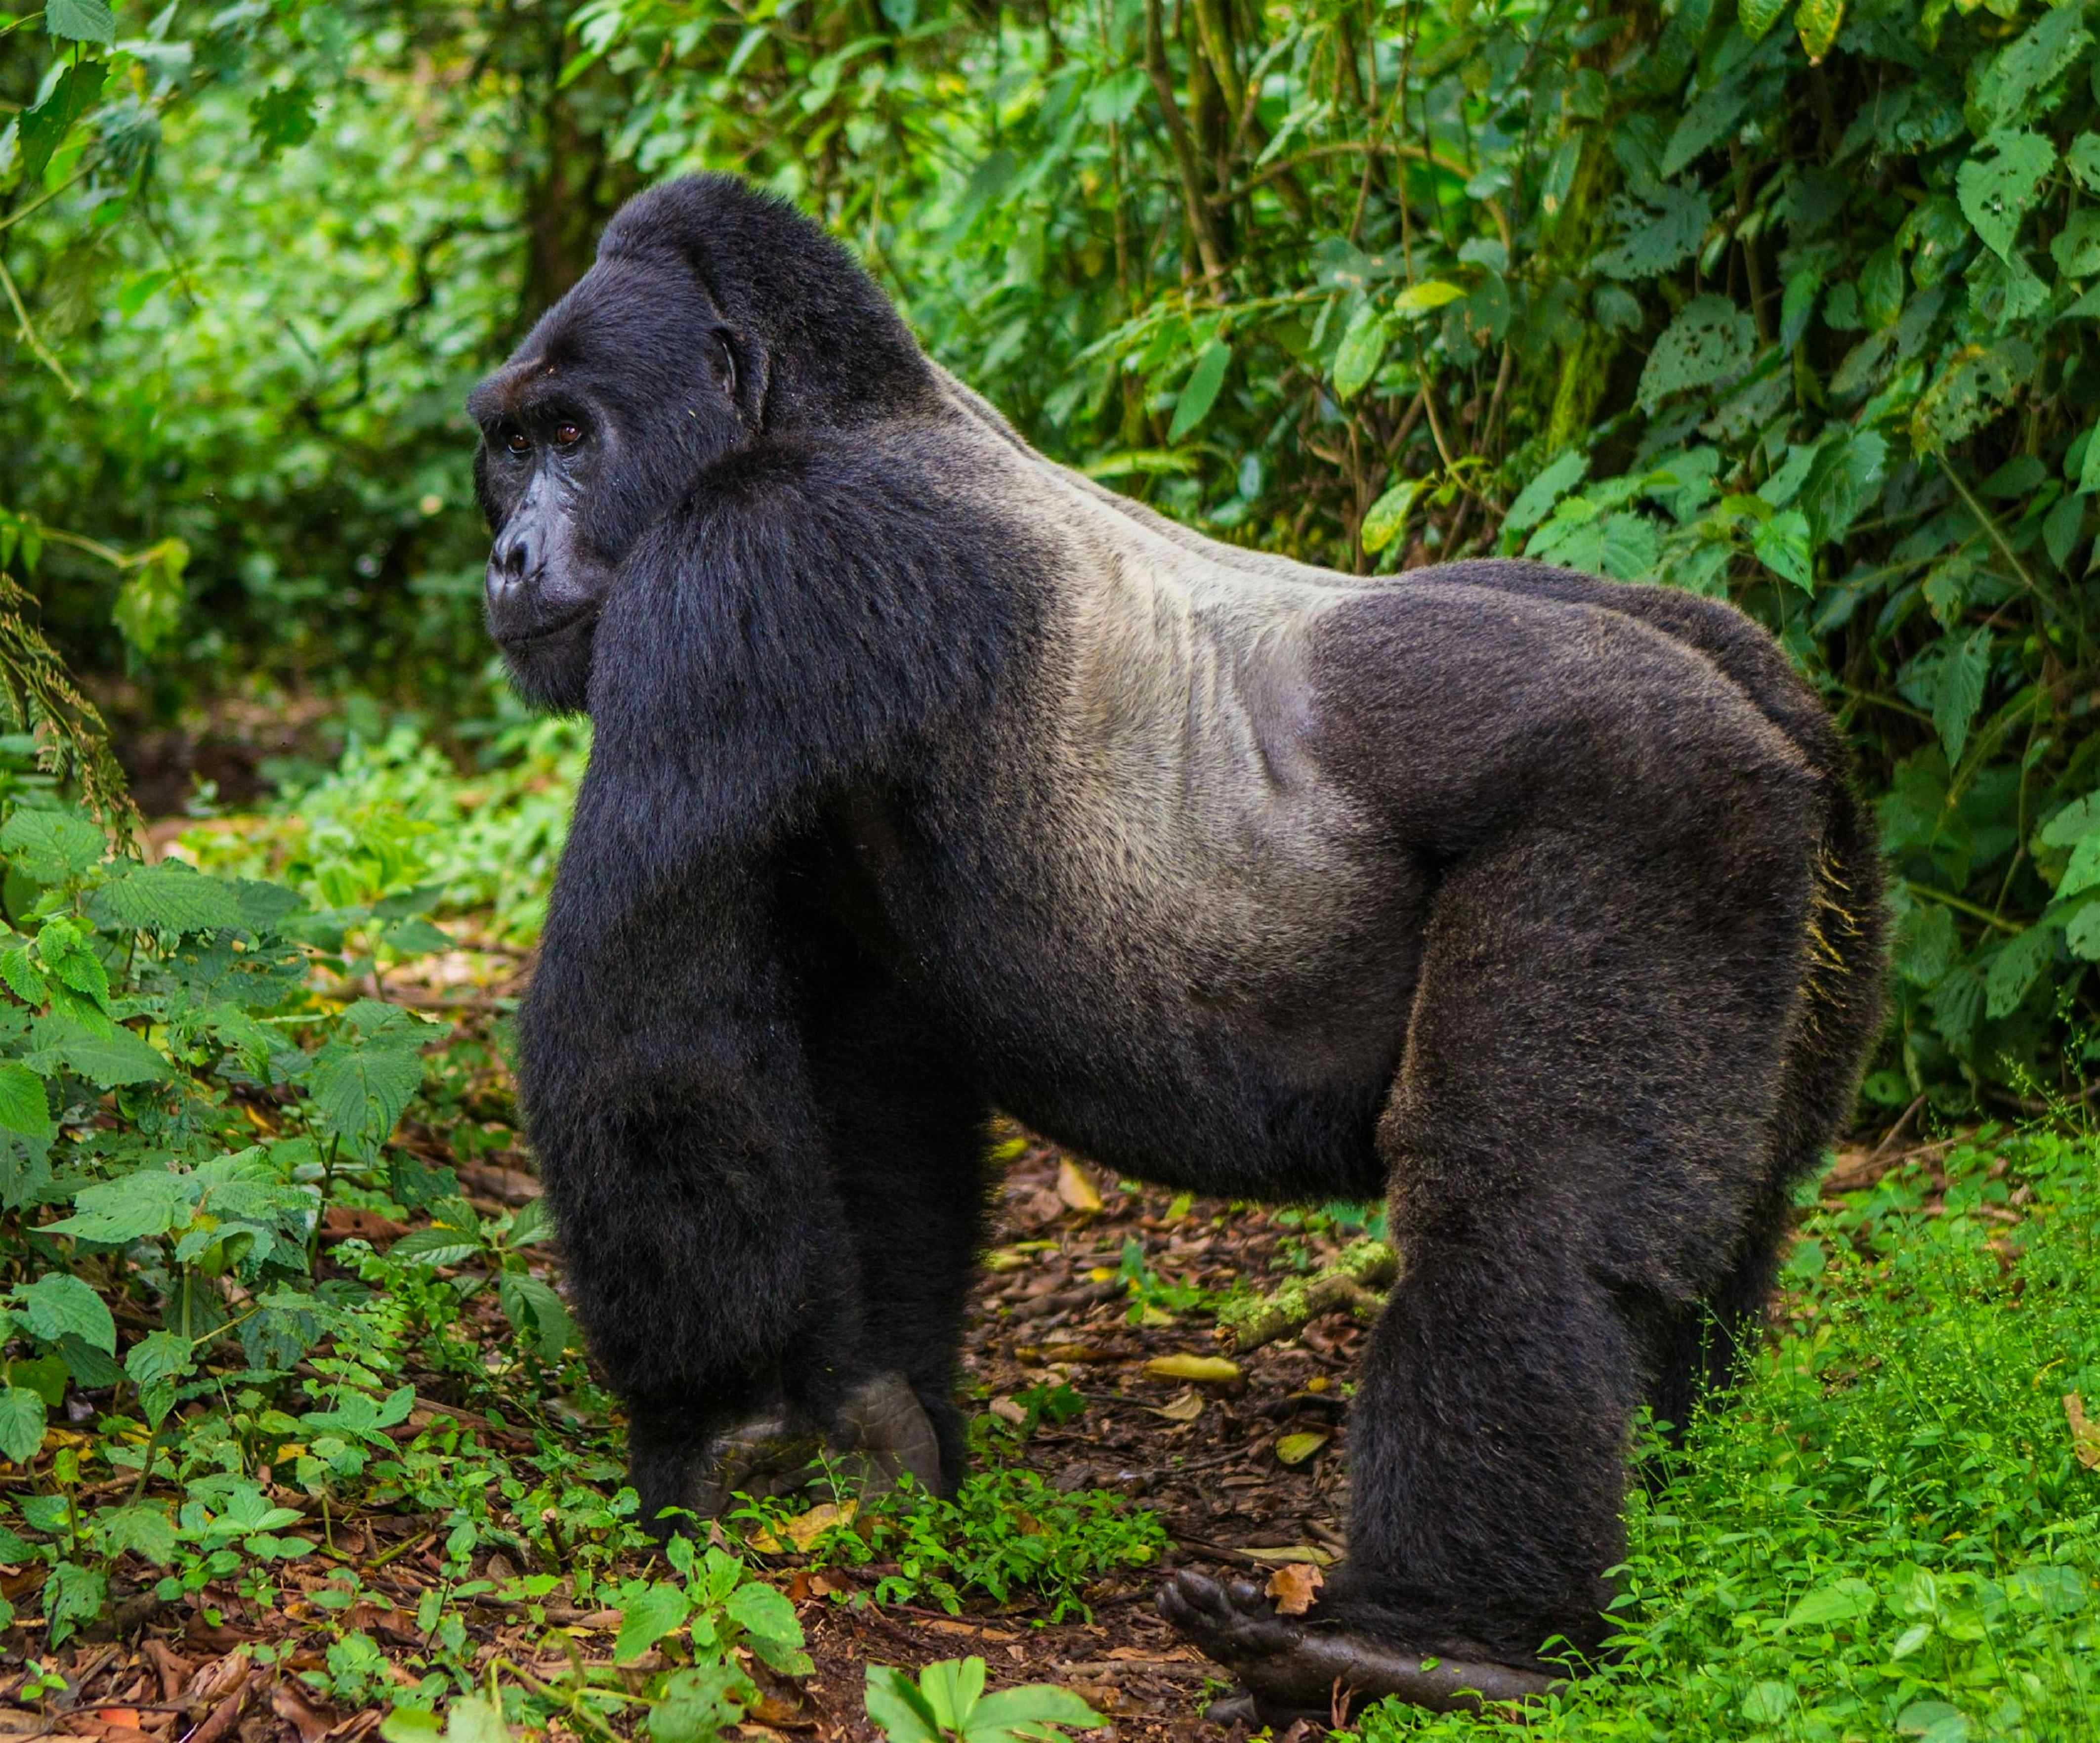 Endangered mountain gorilla populations are rising thanks to